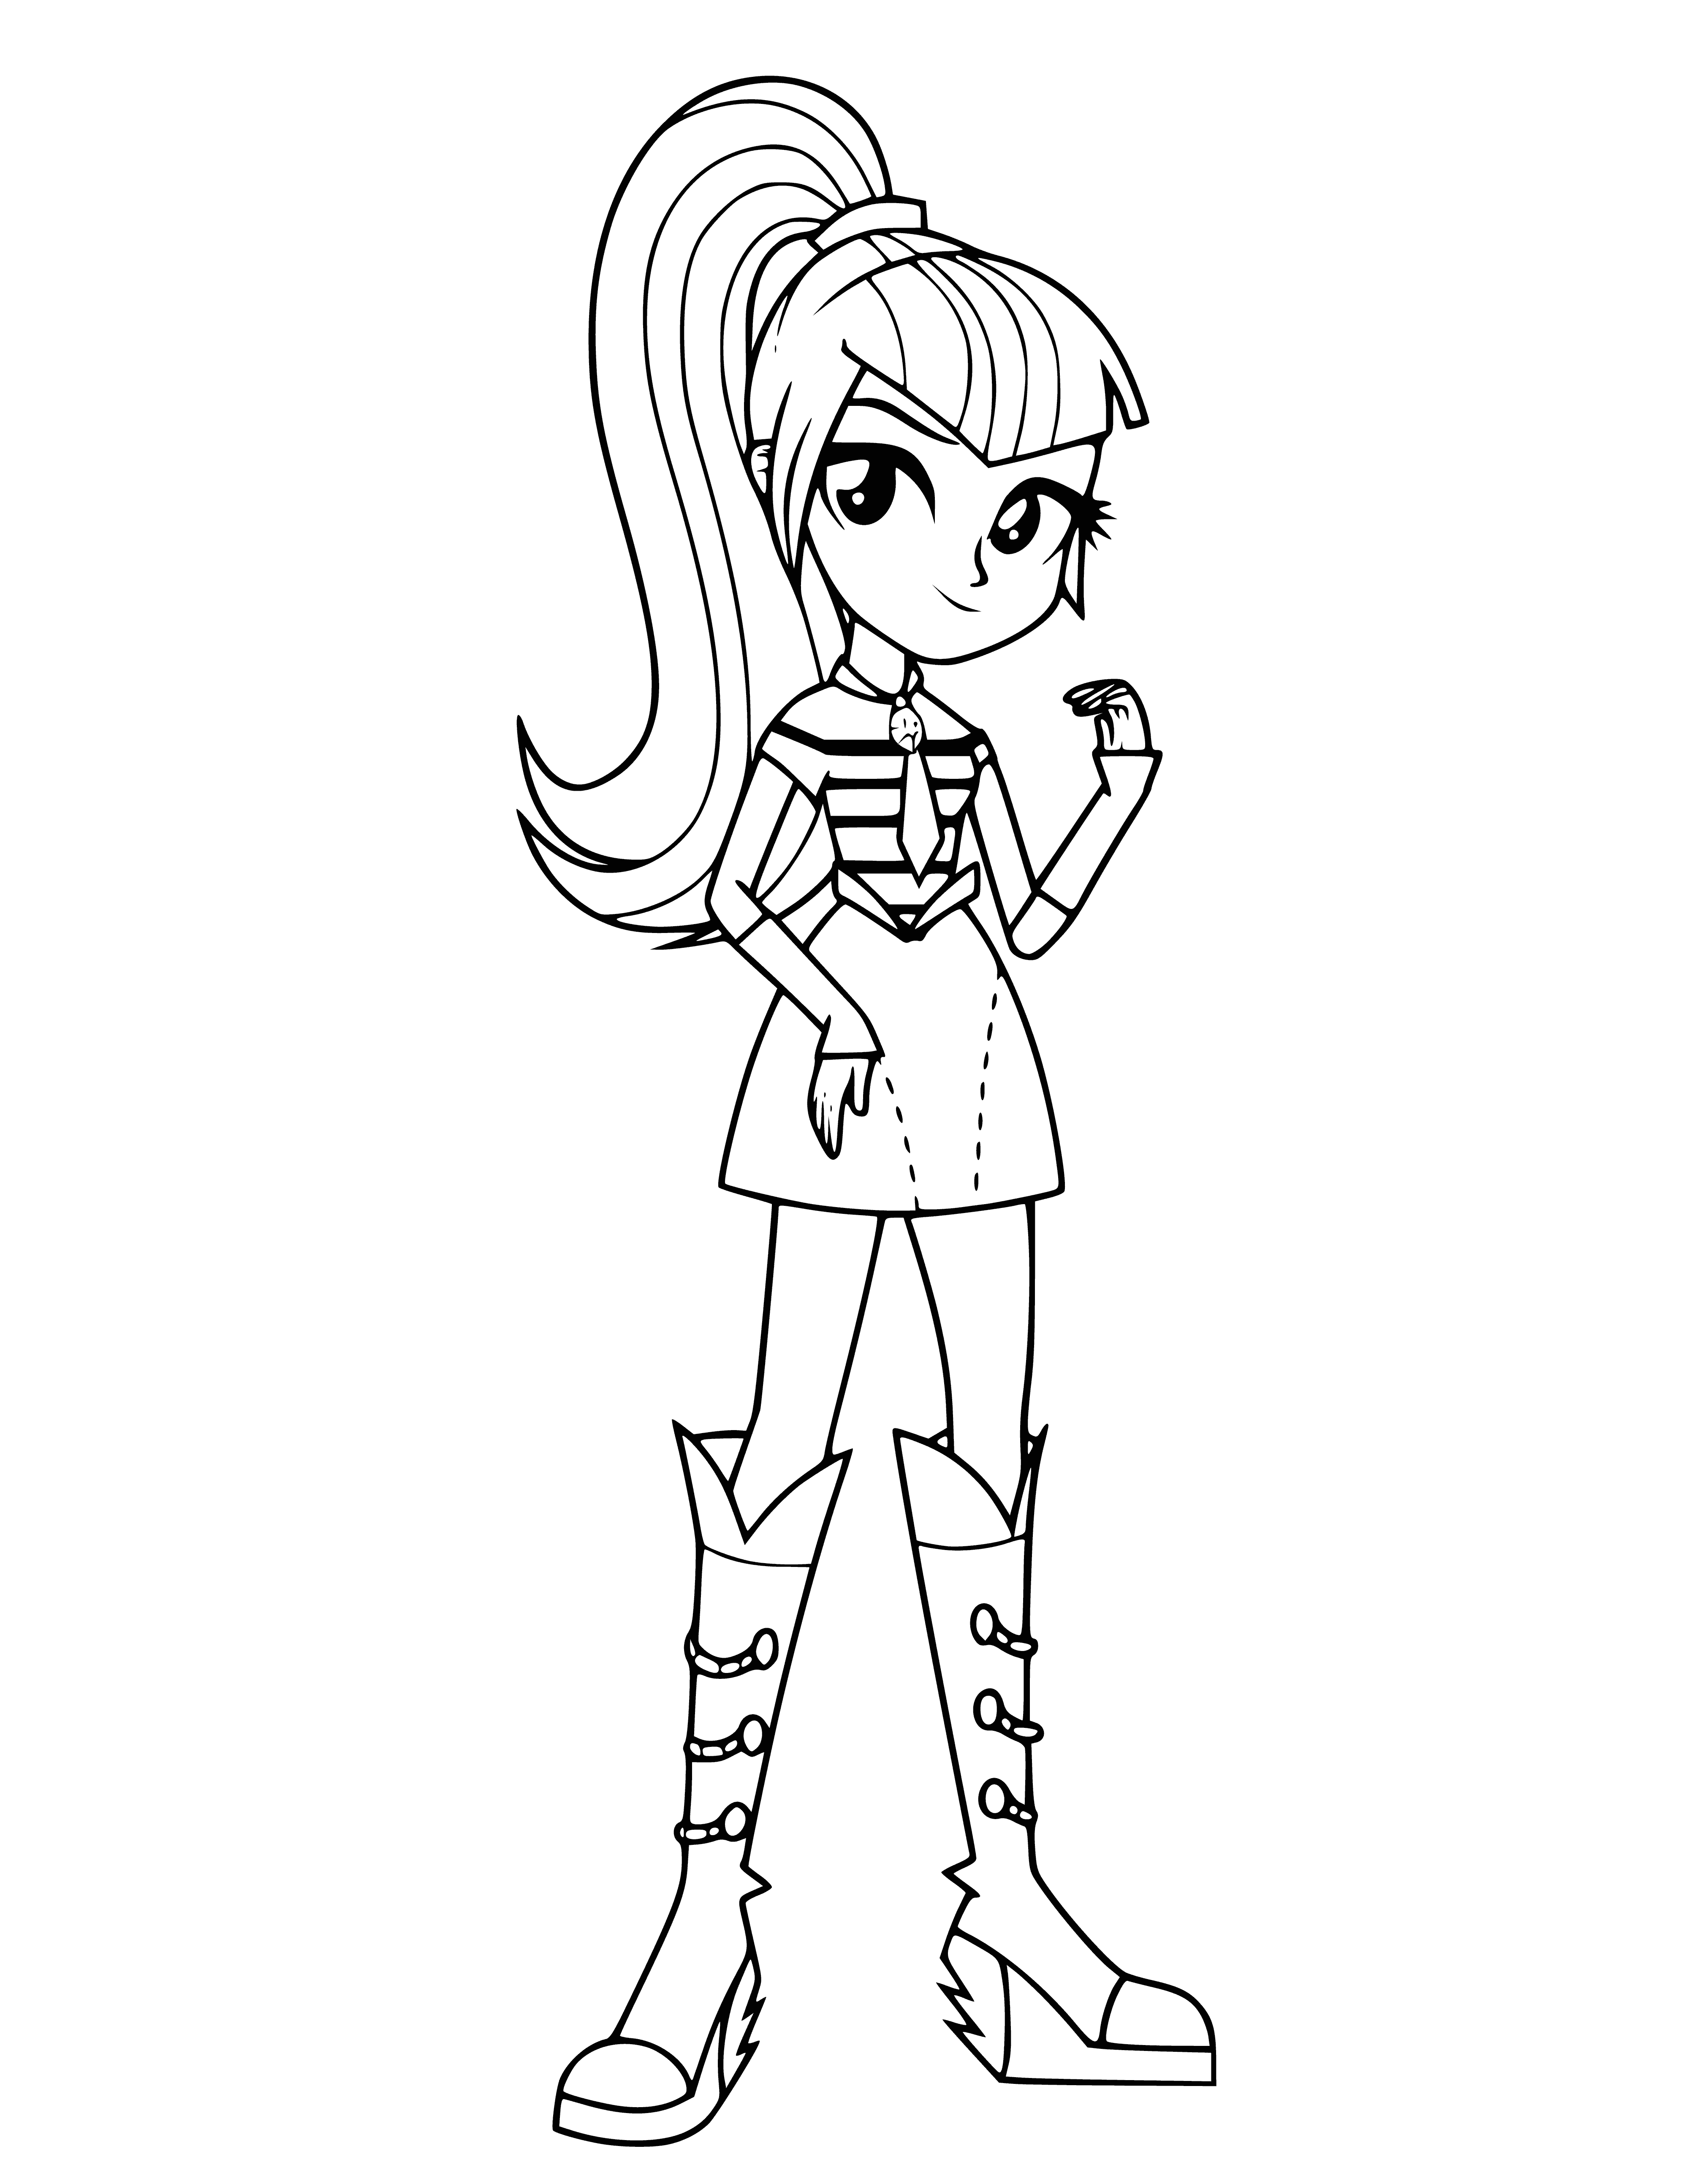 coloring page: Girl with blue hair, eyes & outfit wearing bracelet, necklace & shoes. #coloringpage